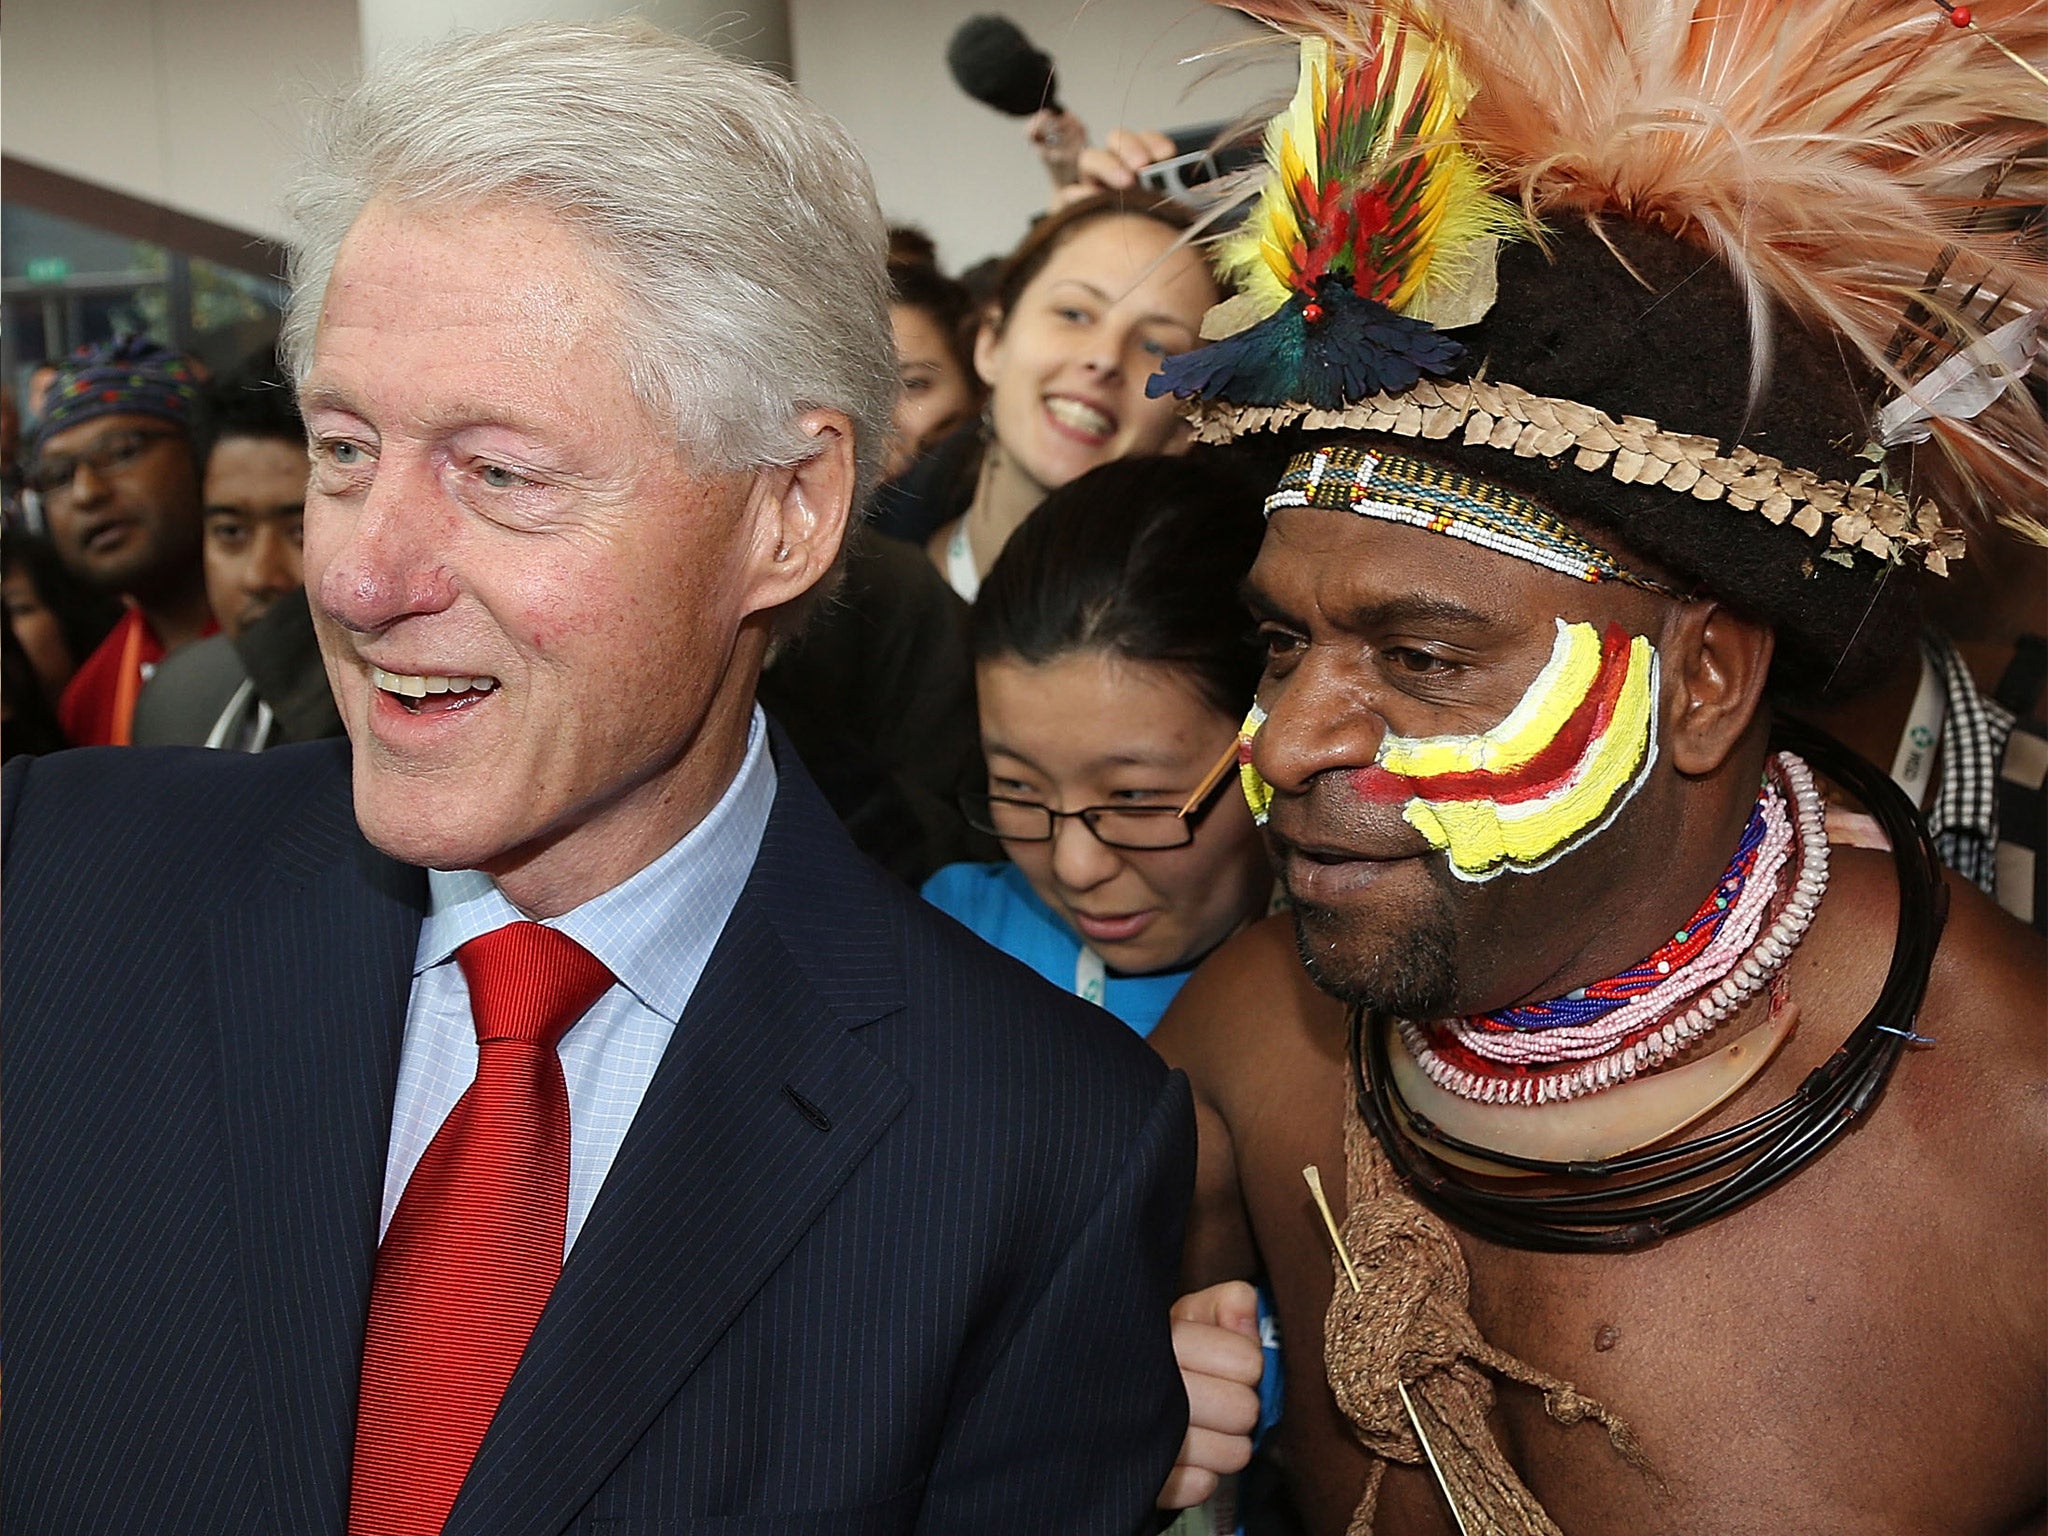 Bill Clinton greets conference attendees at the International Aids Conference in Melbourne